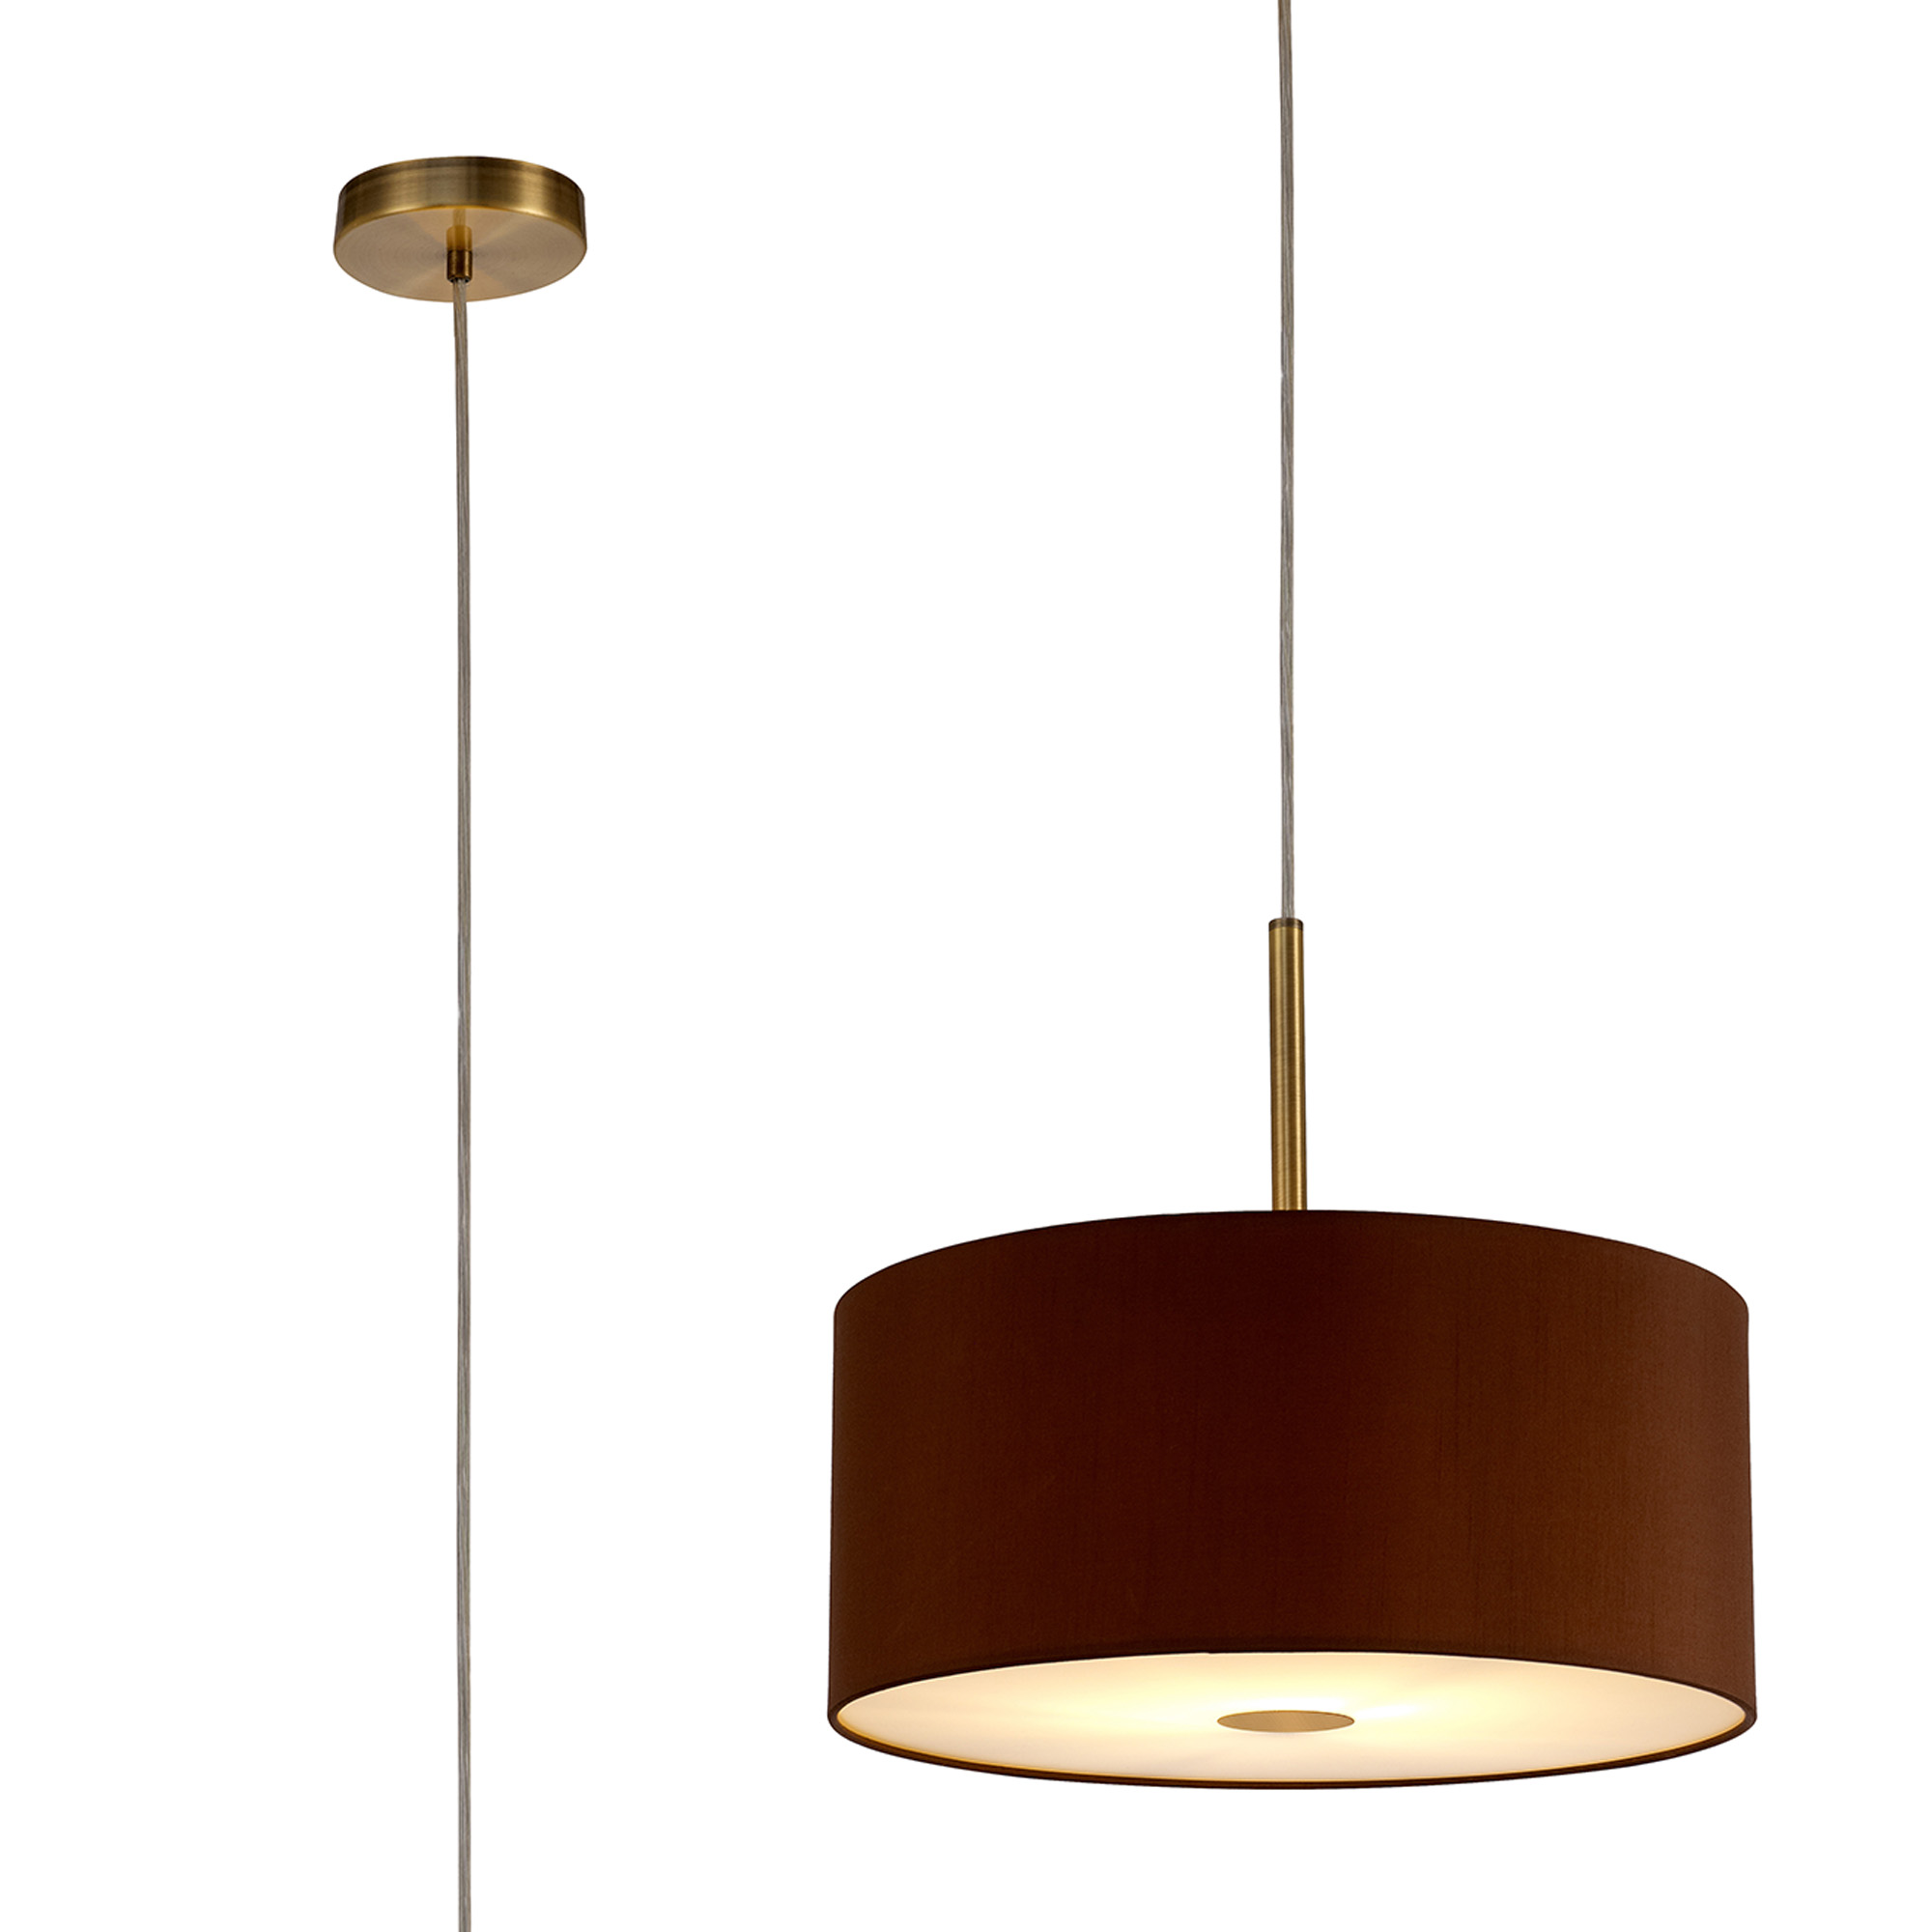 DK0218  Baymont 40cm Pendant 1 Light Antique Brass; Raw Cocoa/Grecian Bronze; Frosted Diffuser